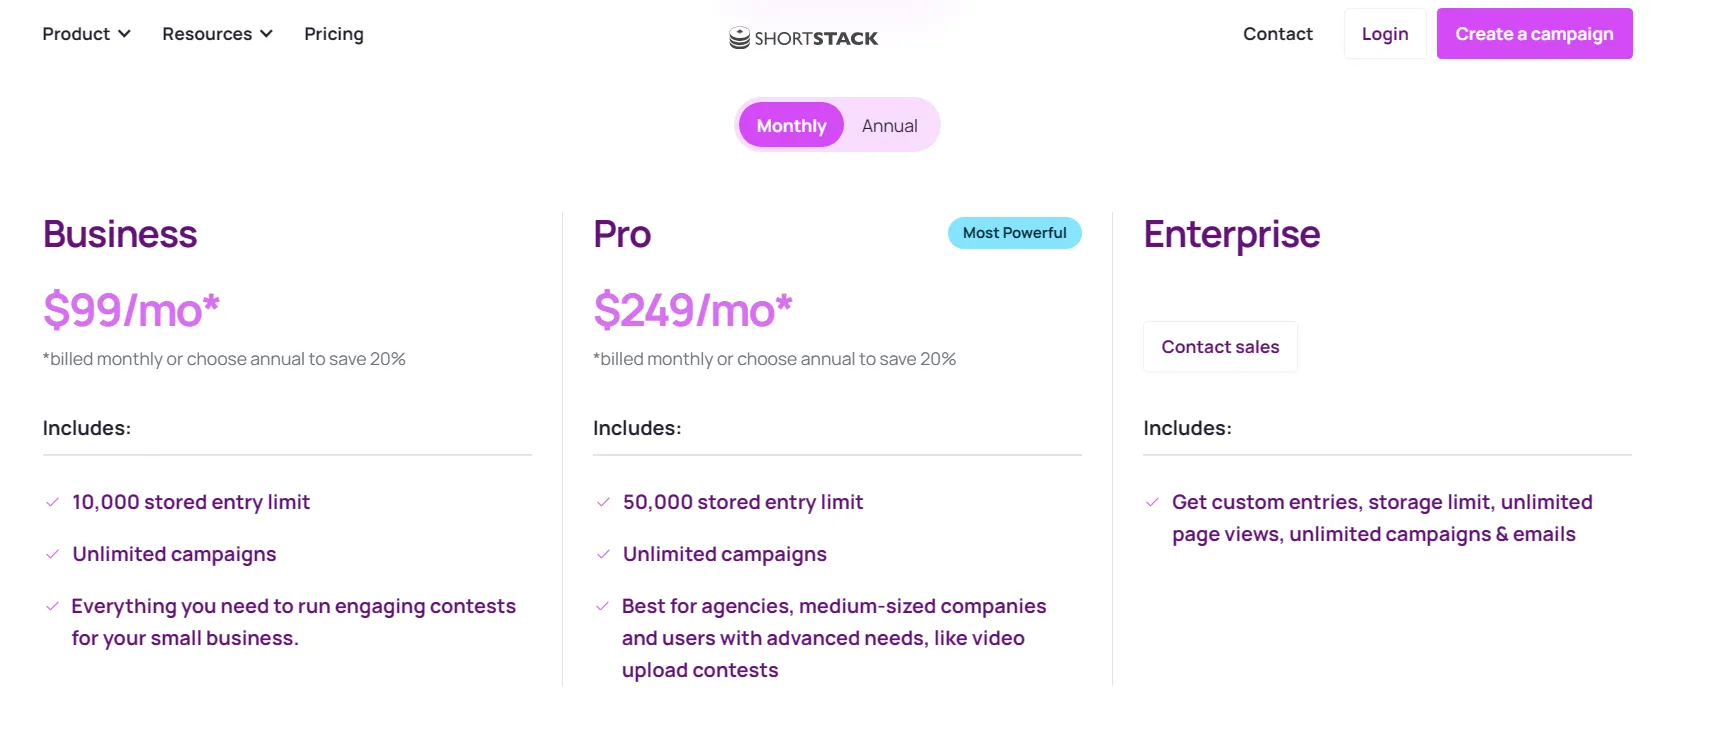 ShortStack Review- Pricing